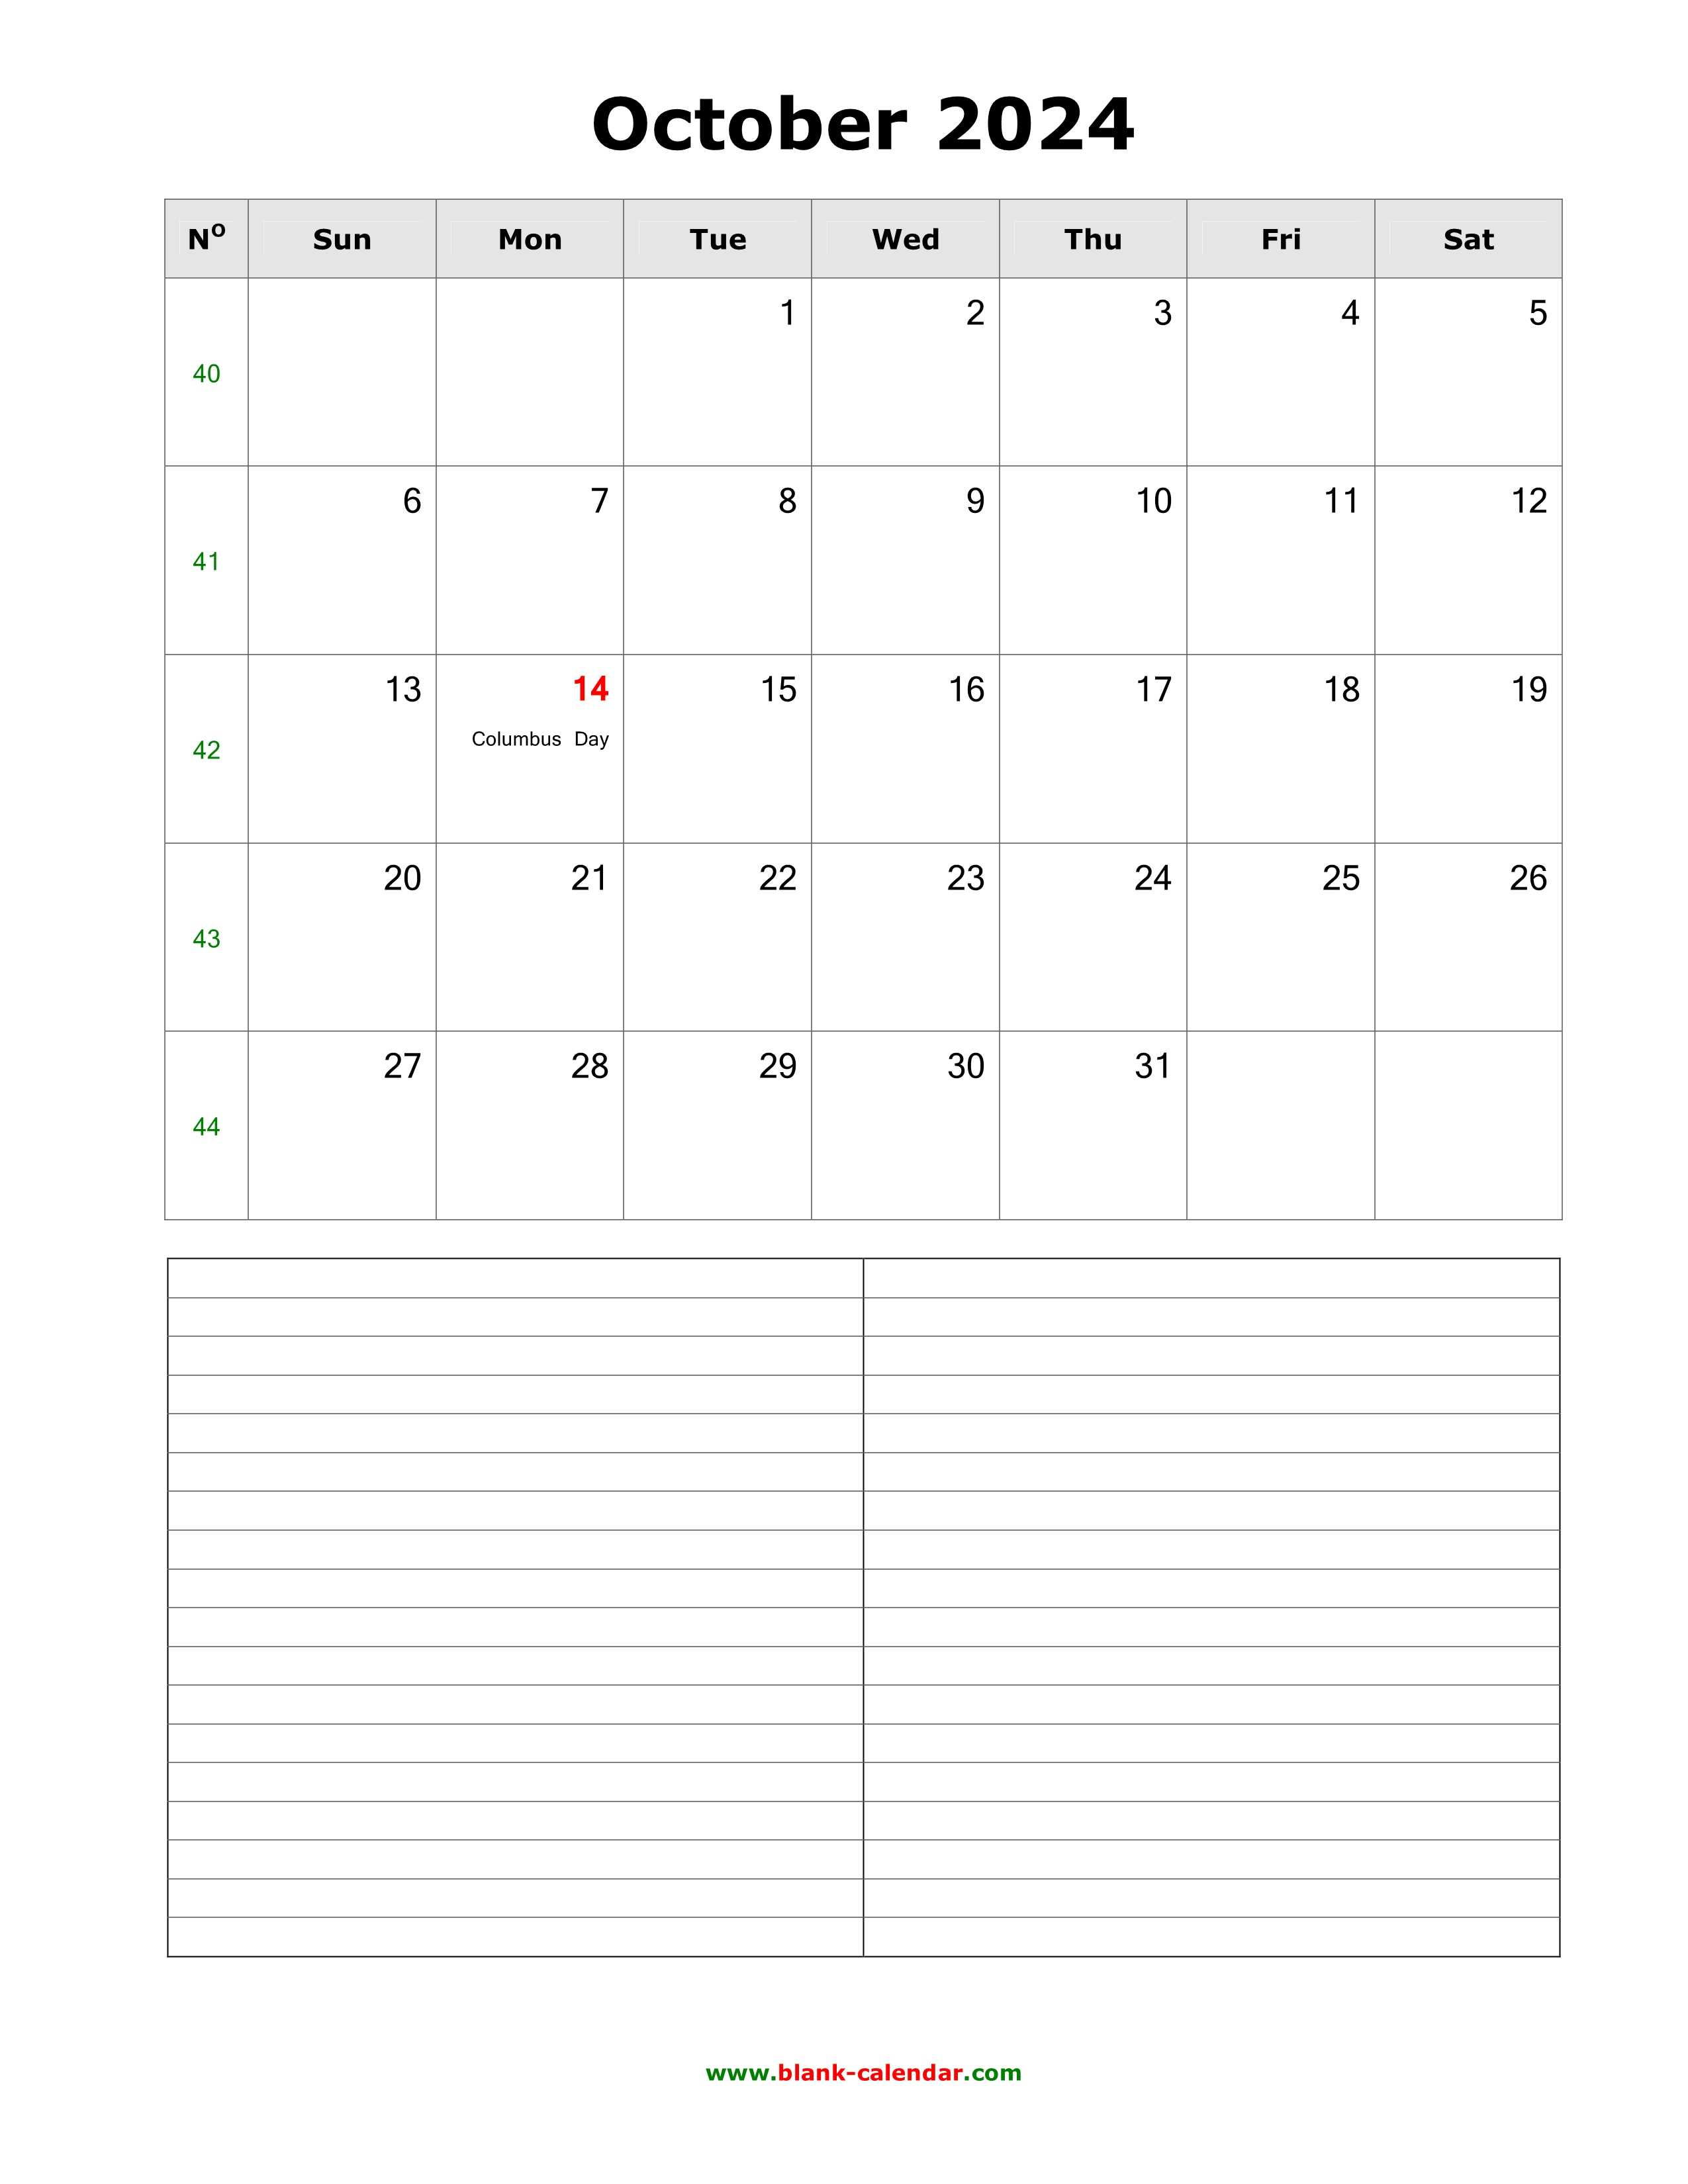 Download October 2024 Blank Calendar with Space for Notes (vertical)